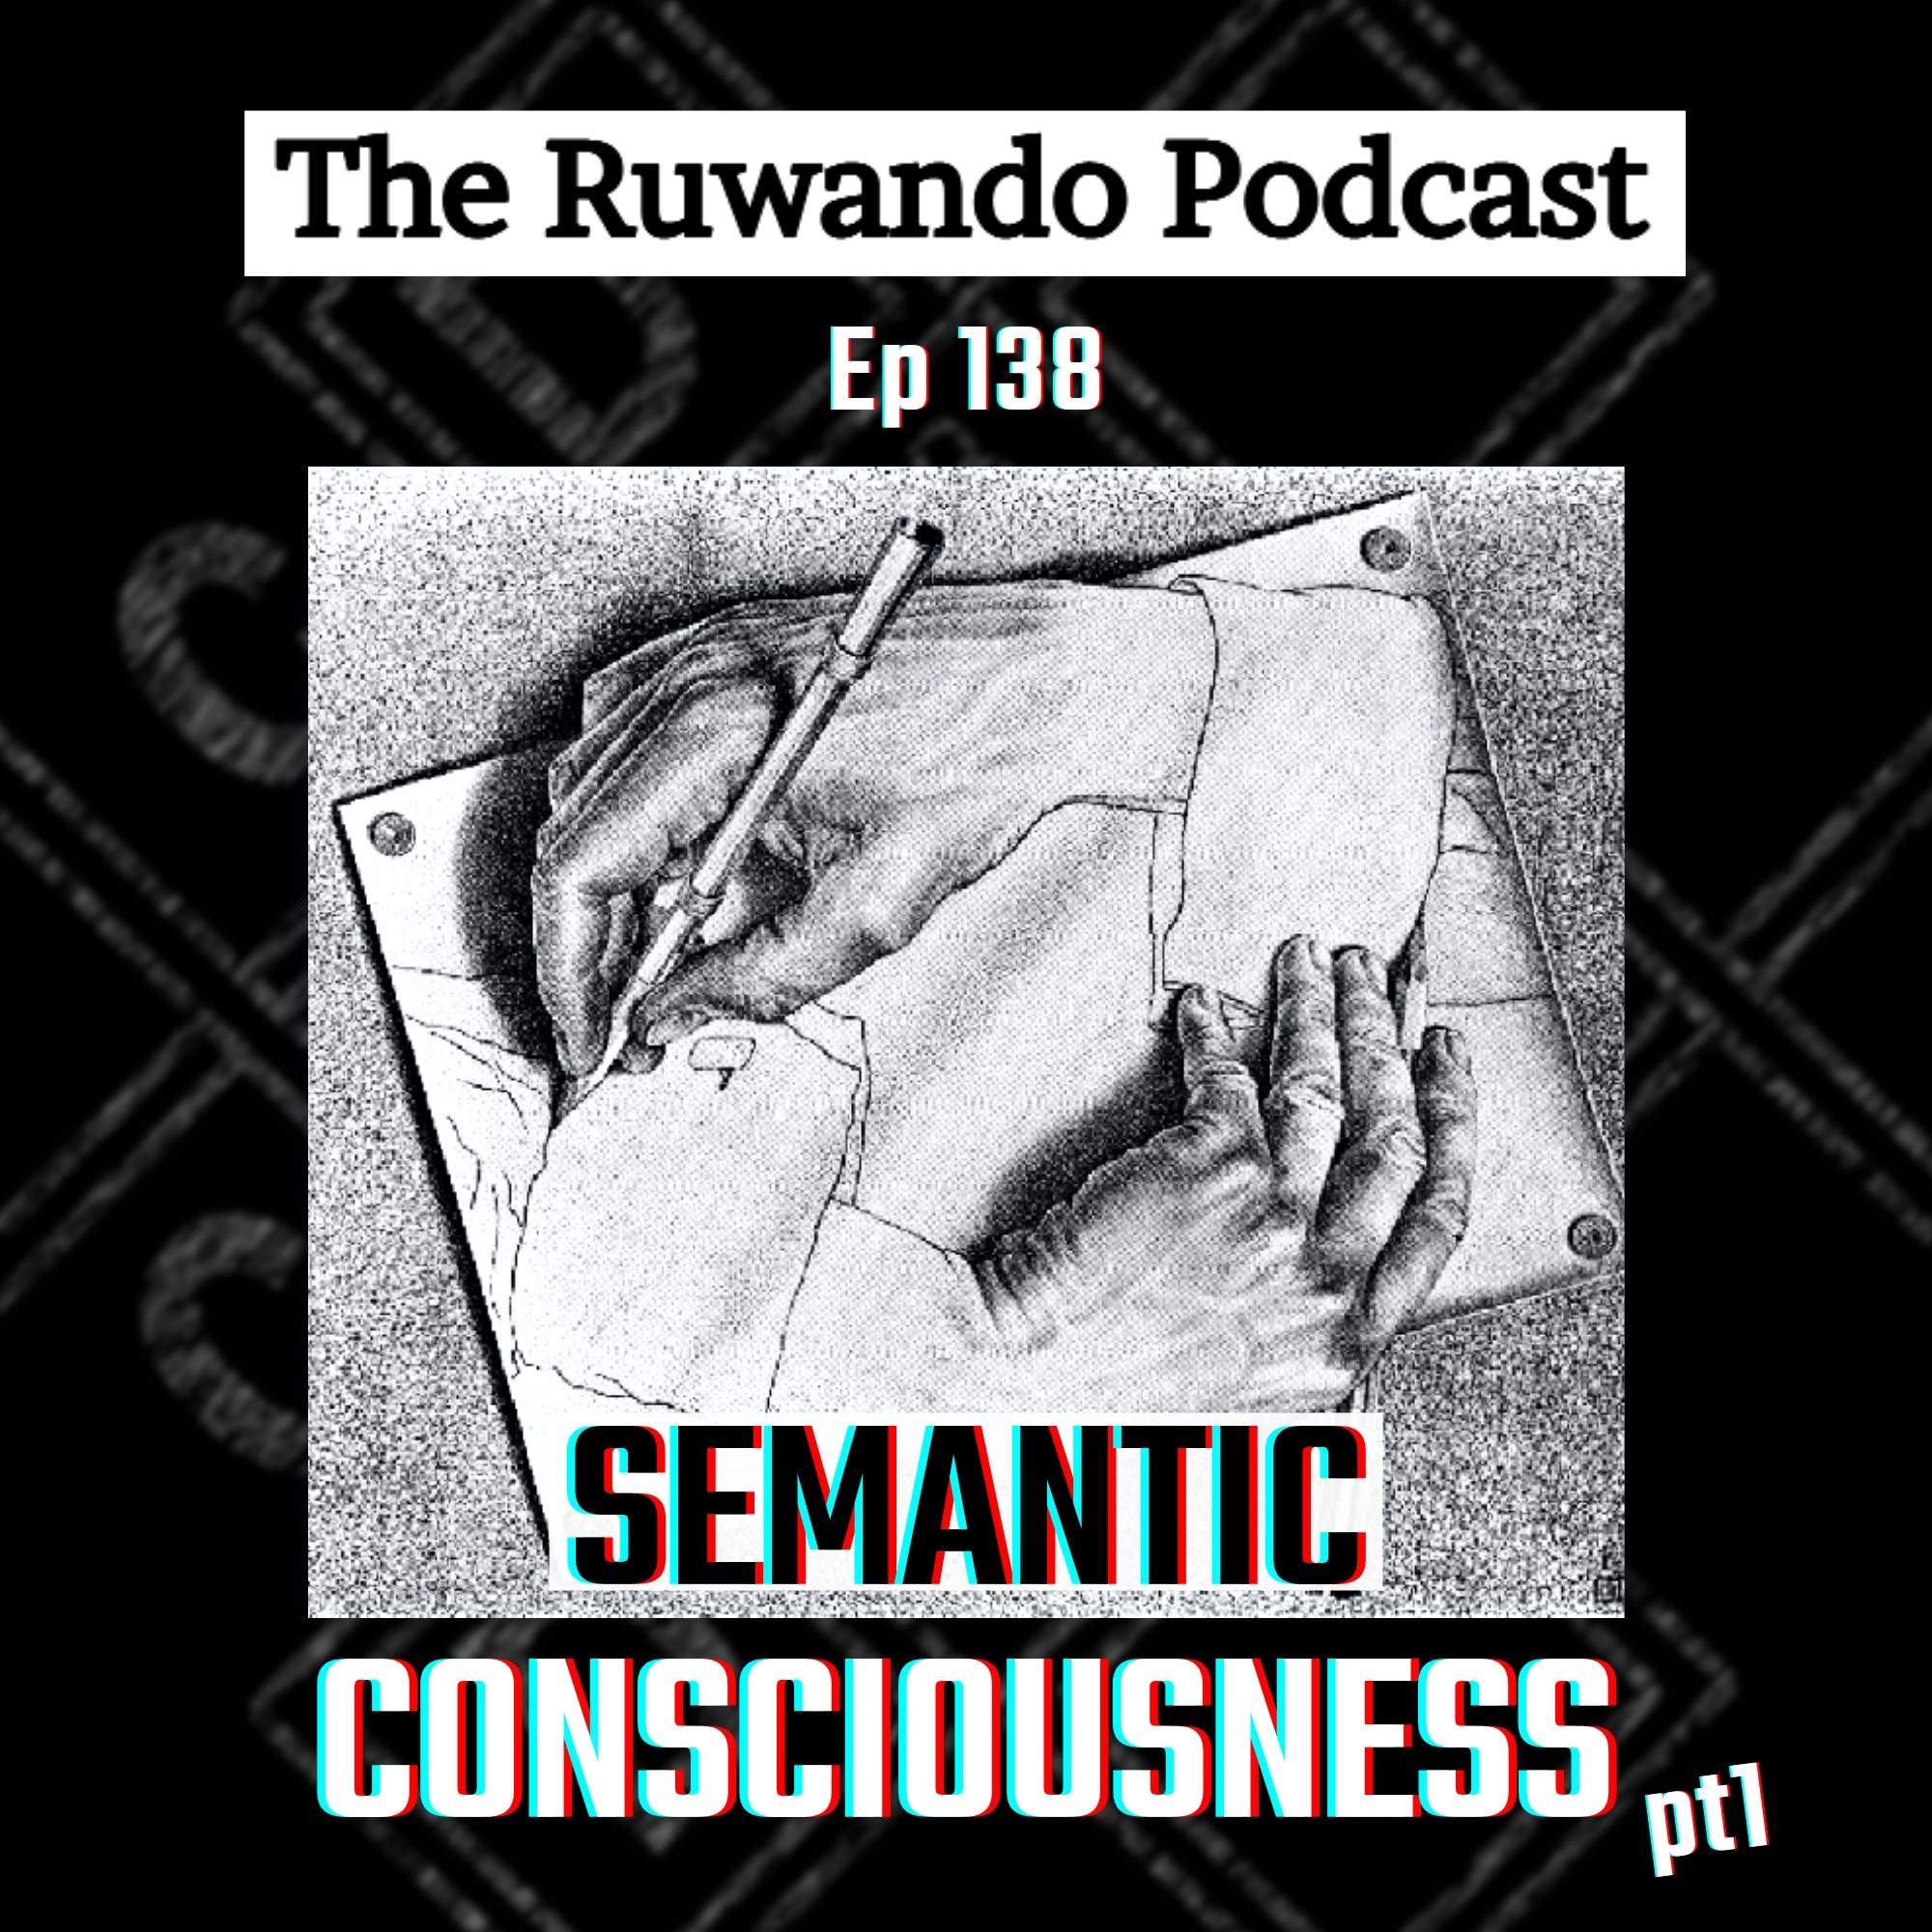 138 - Semantic Consciousness: Abstraction Intelligence & How Language Creates Reality (Pt1)